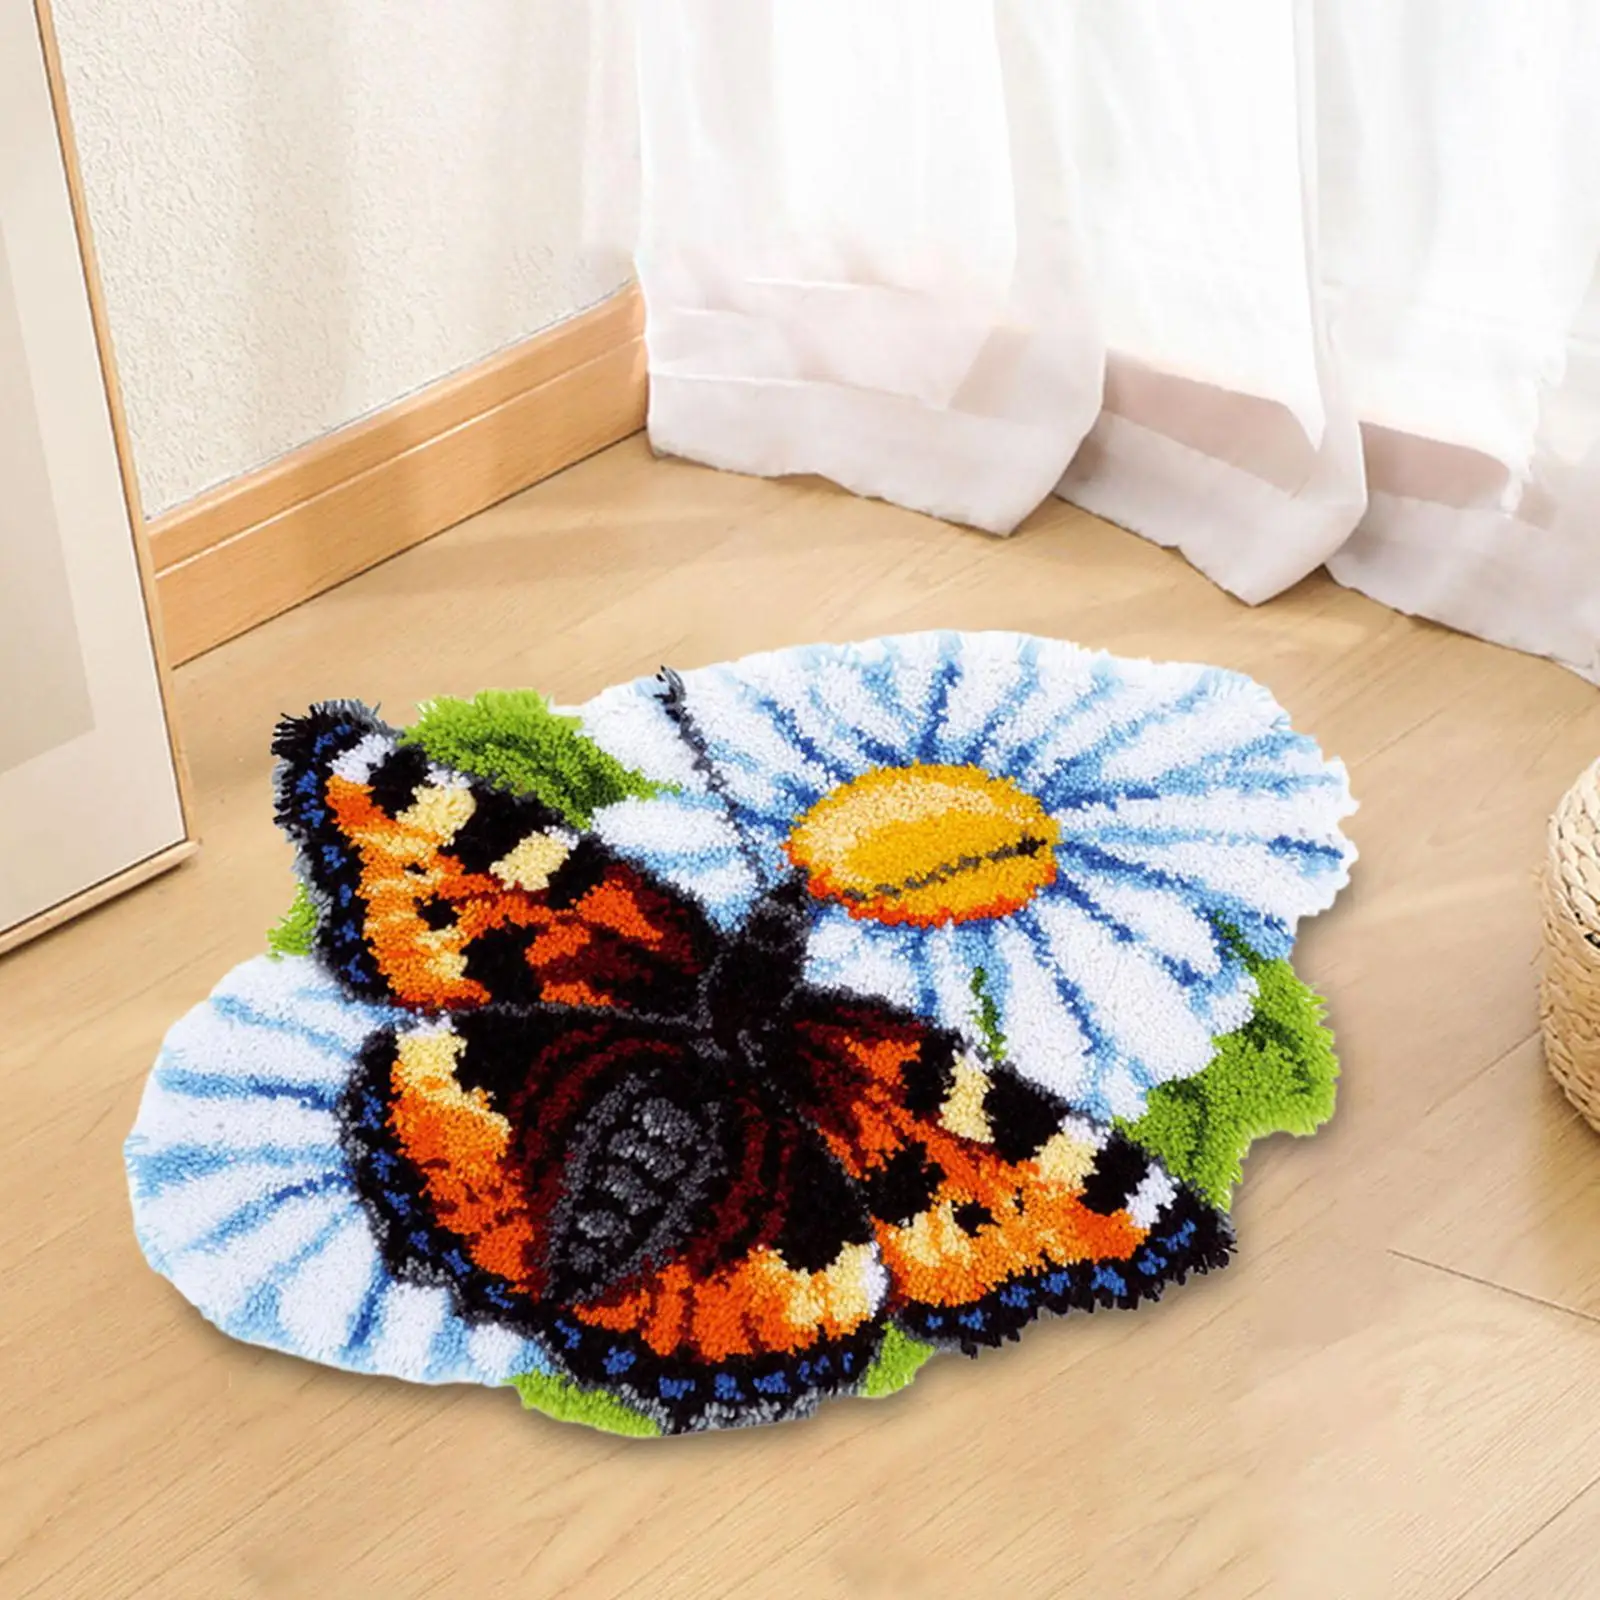 Creative Latch Hook Rug Kits Crochet Embroidery Handmade DIY for Cushion Floor Mats Home Decoration Accessory Adults and Kids